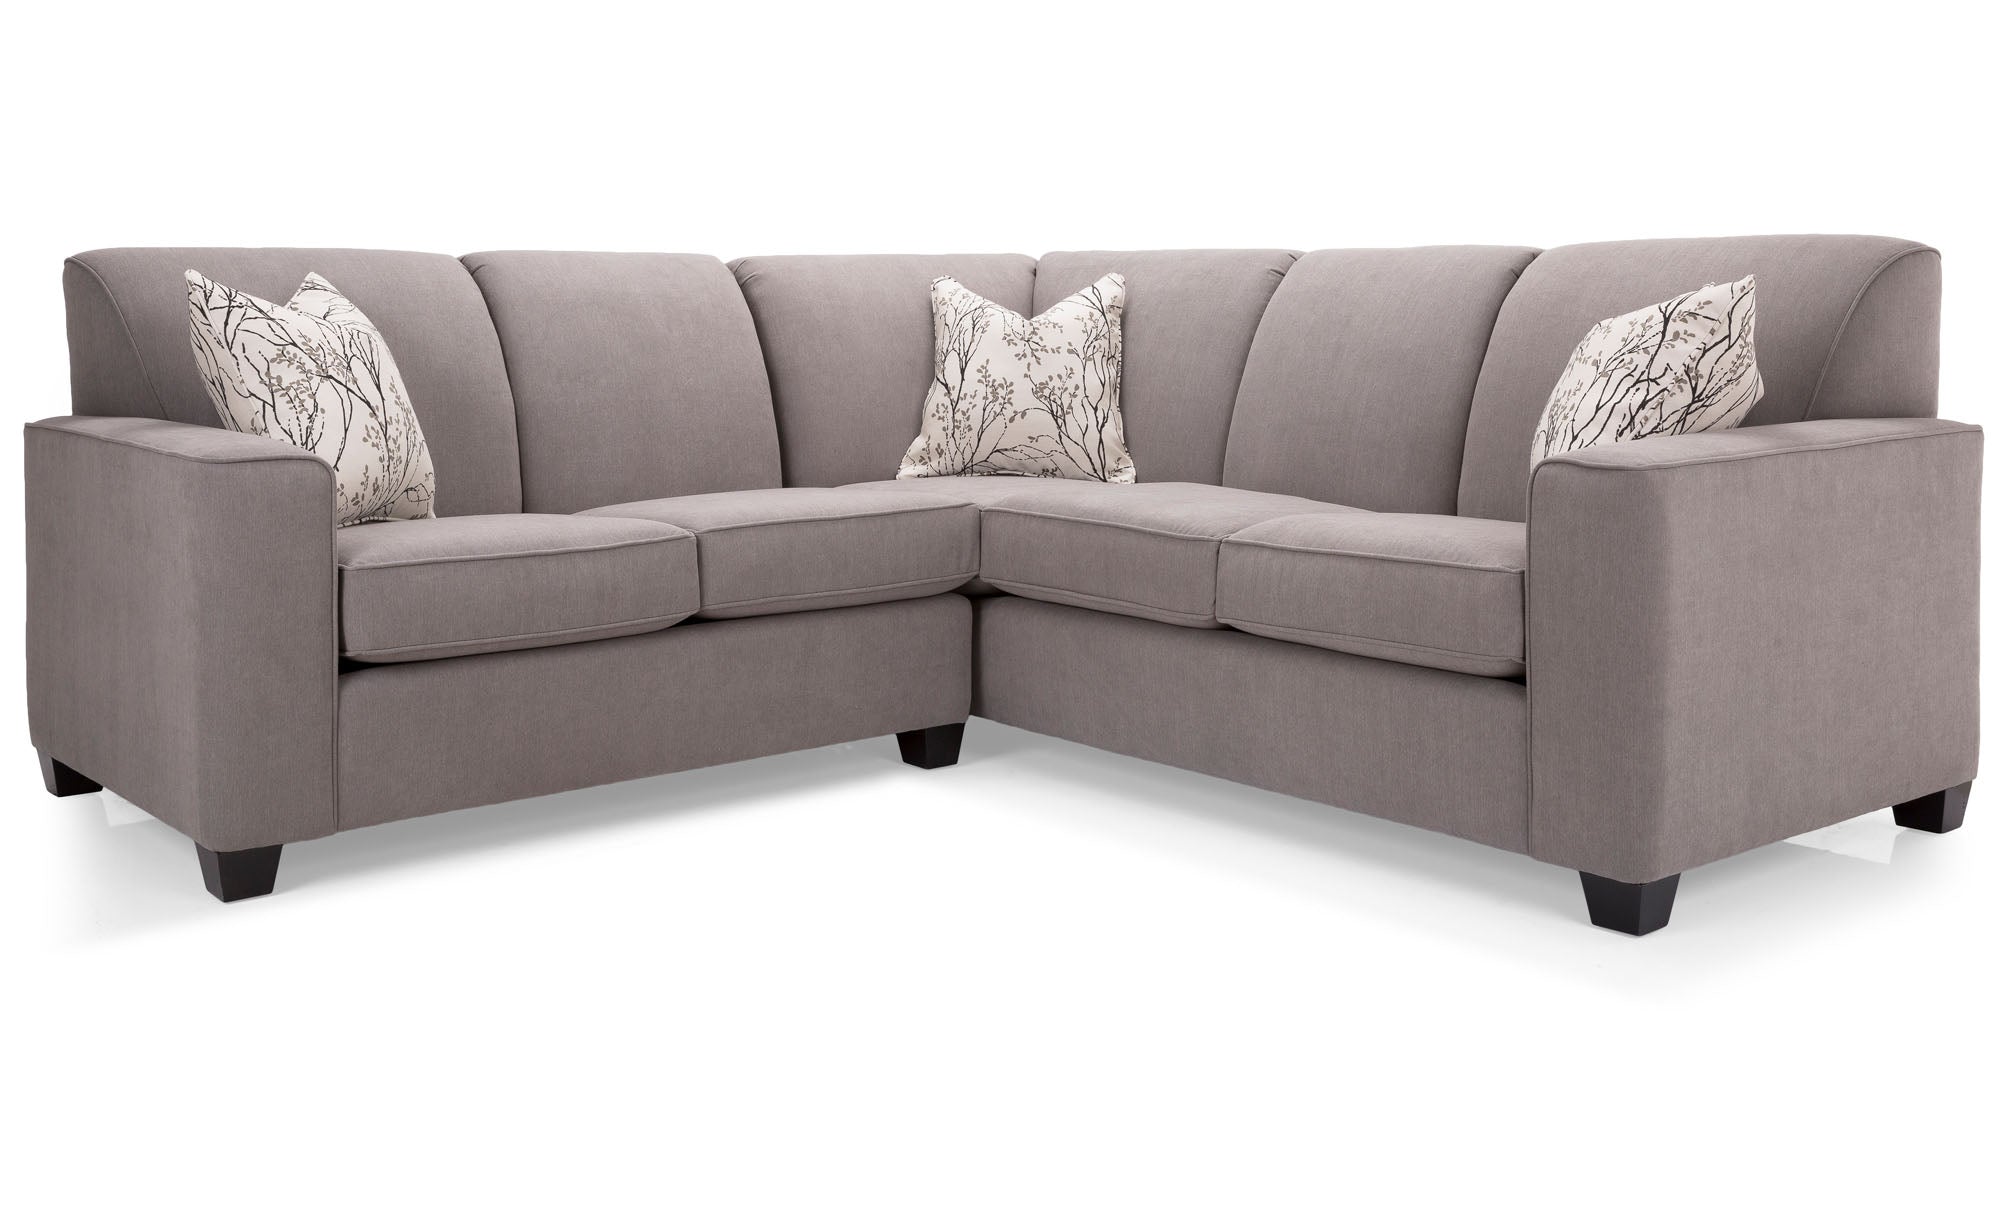 Lotus Taupe 2 Piece Sectional - MJM Furniture